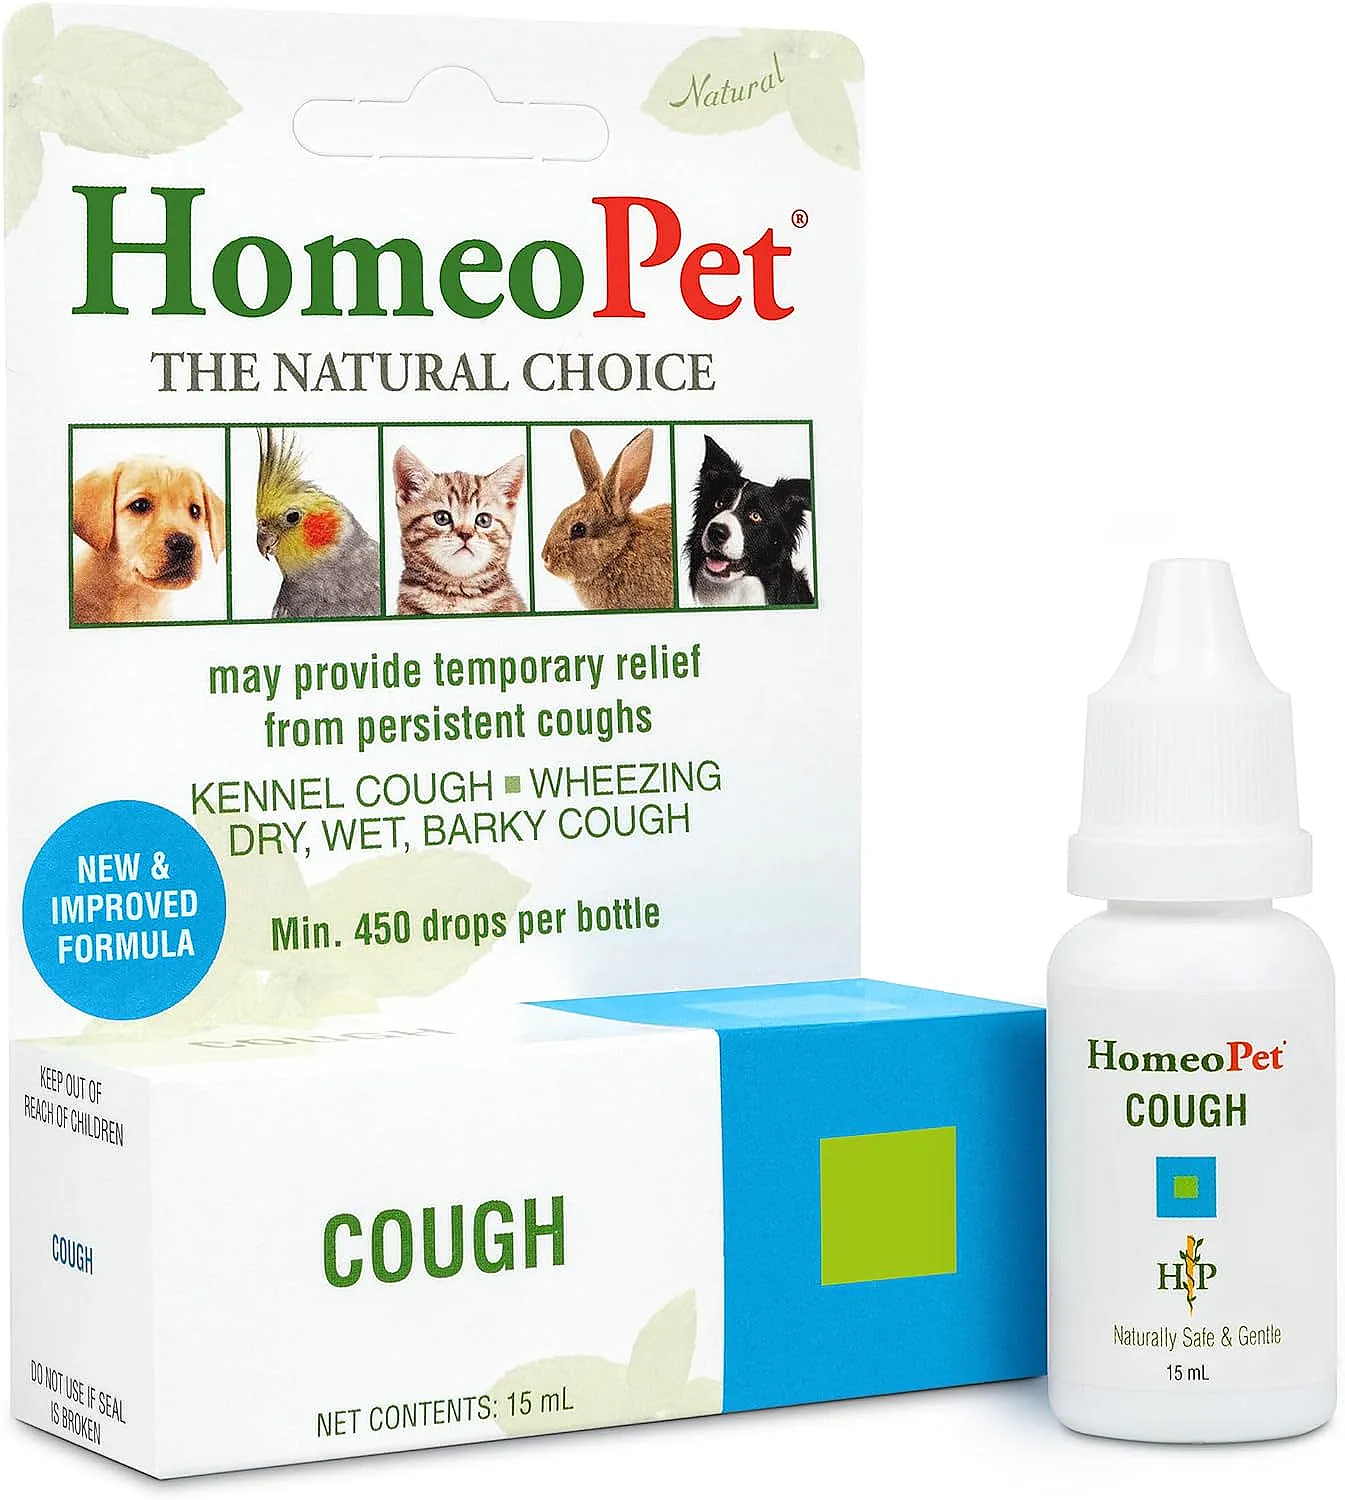 Natural Cough Supplement for dogs